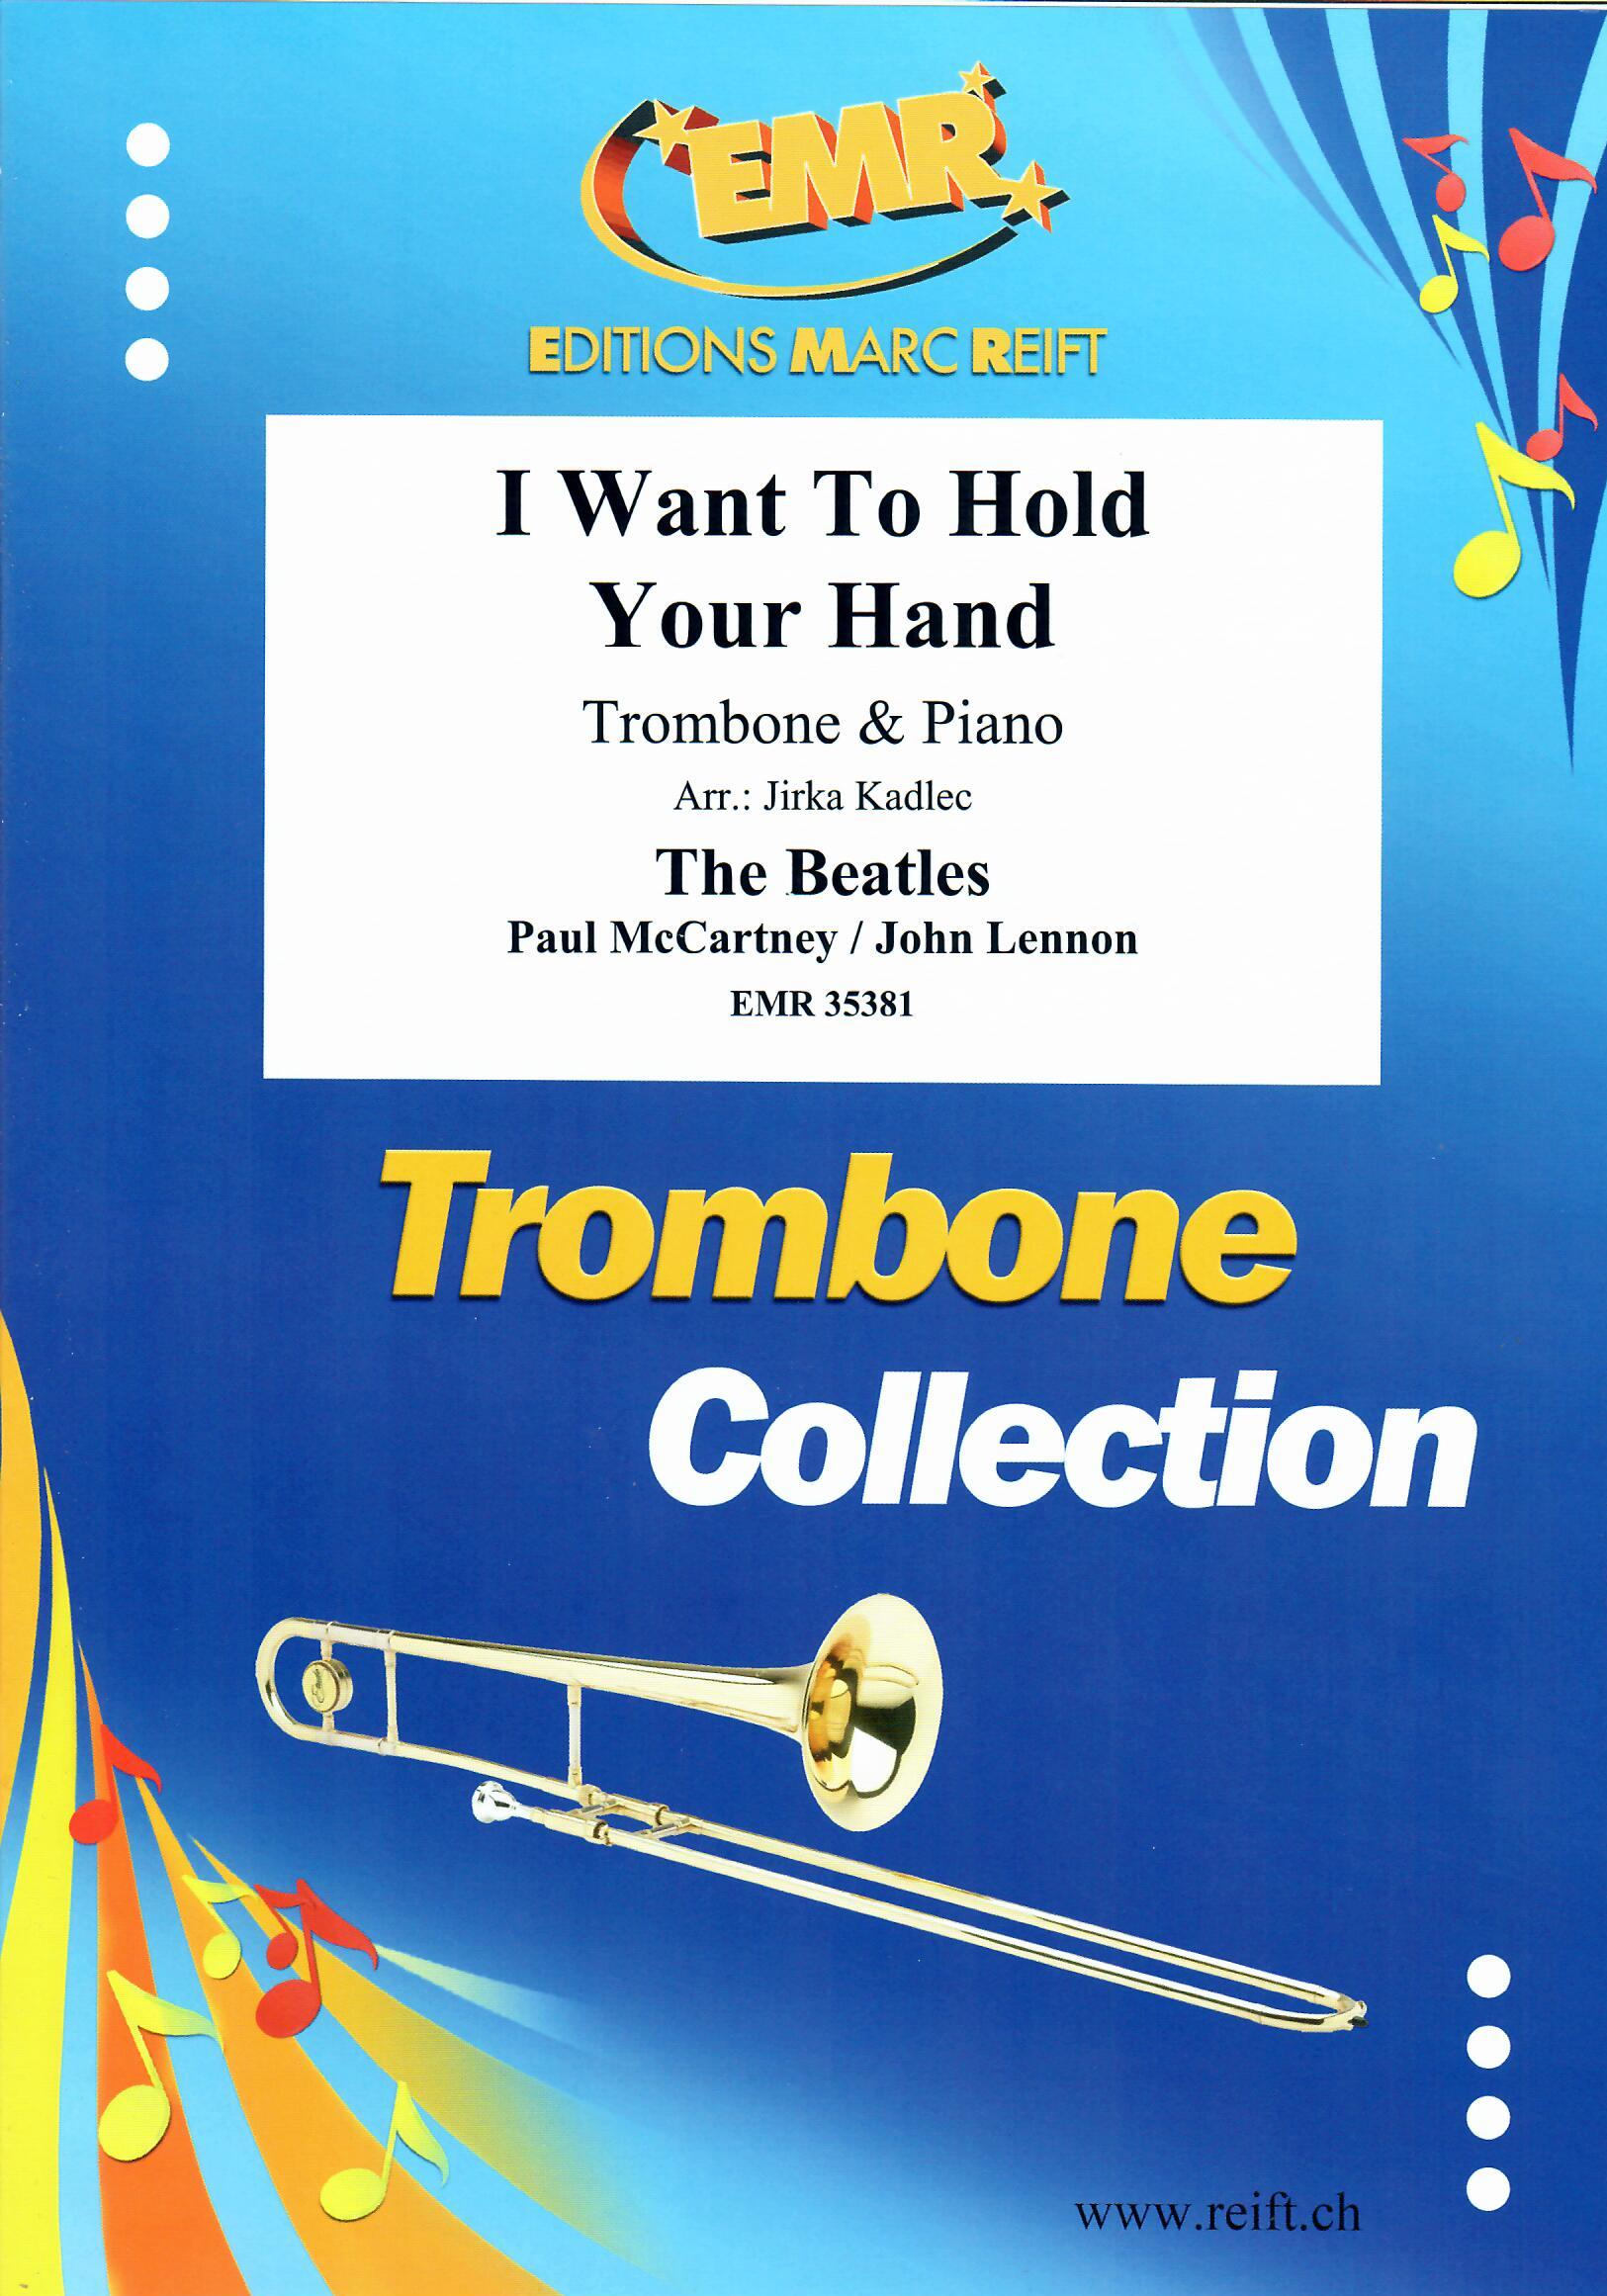 I WANT TO HOLD YOUR HAND, SOLOS - Trombone